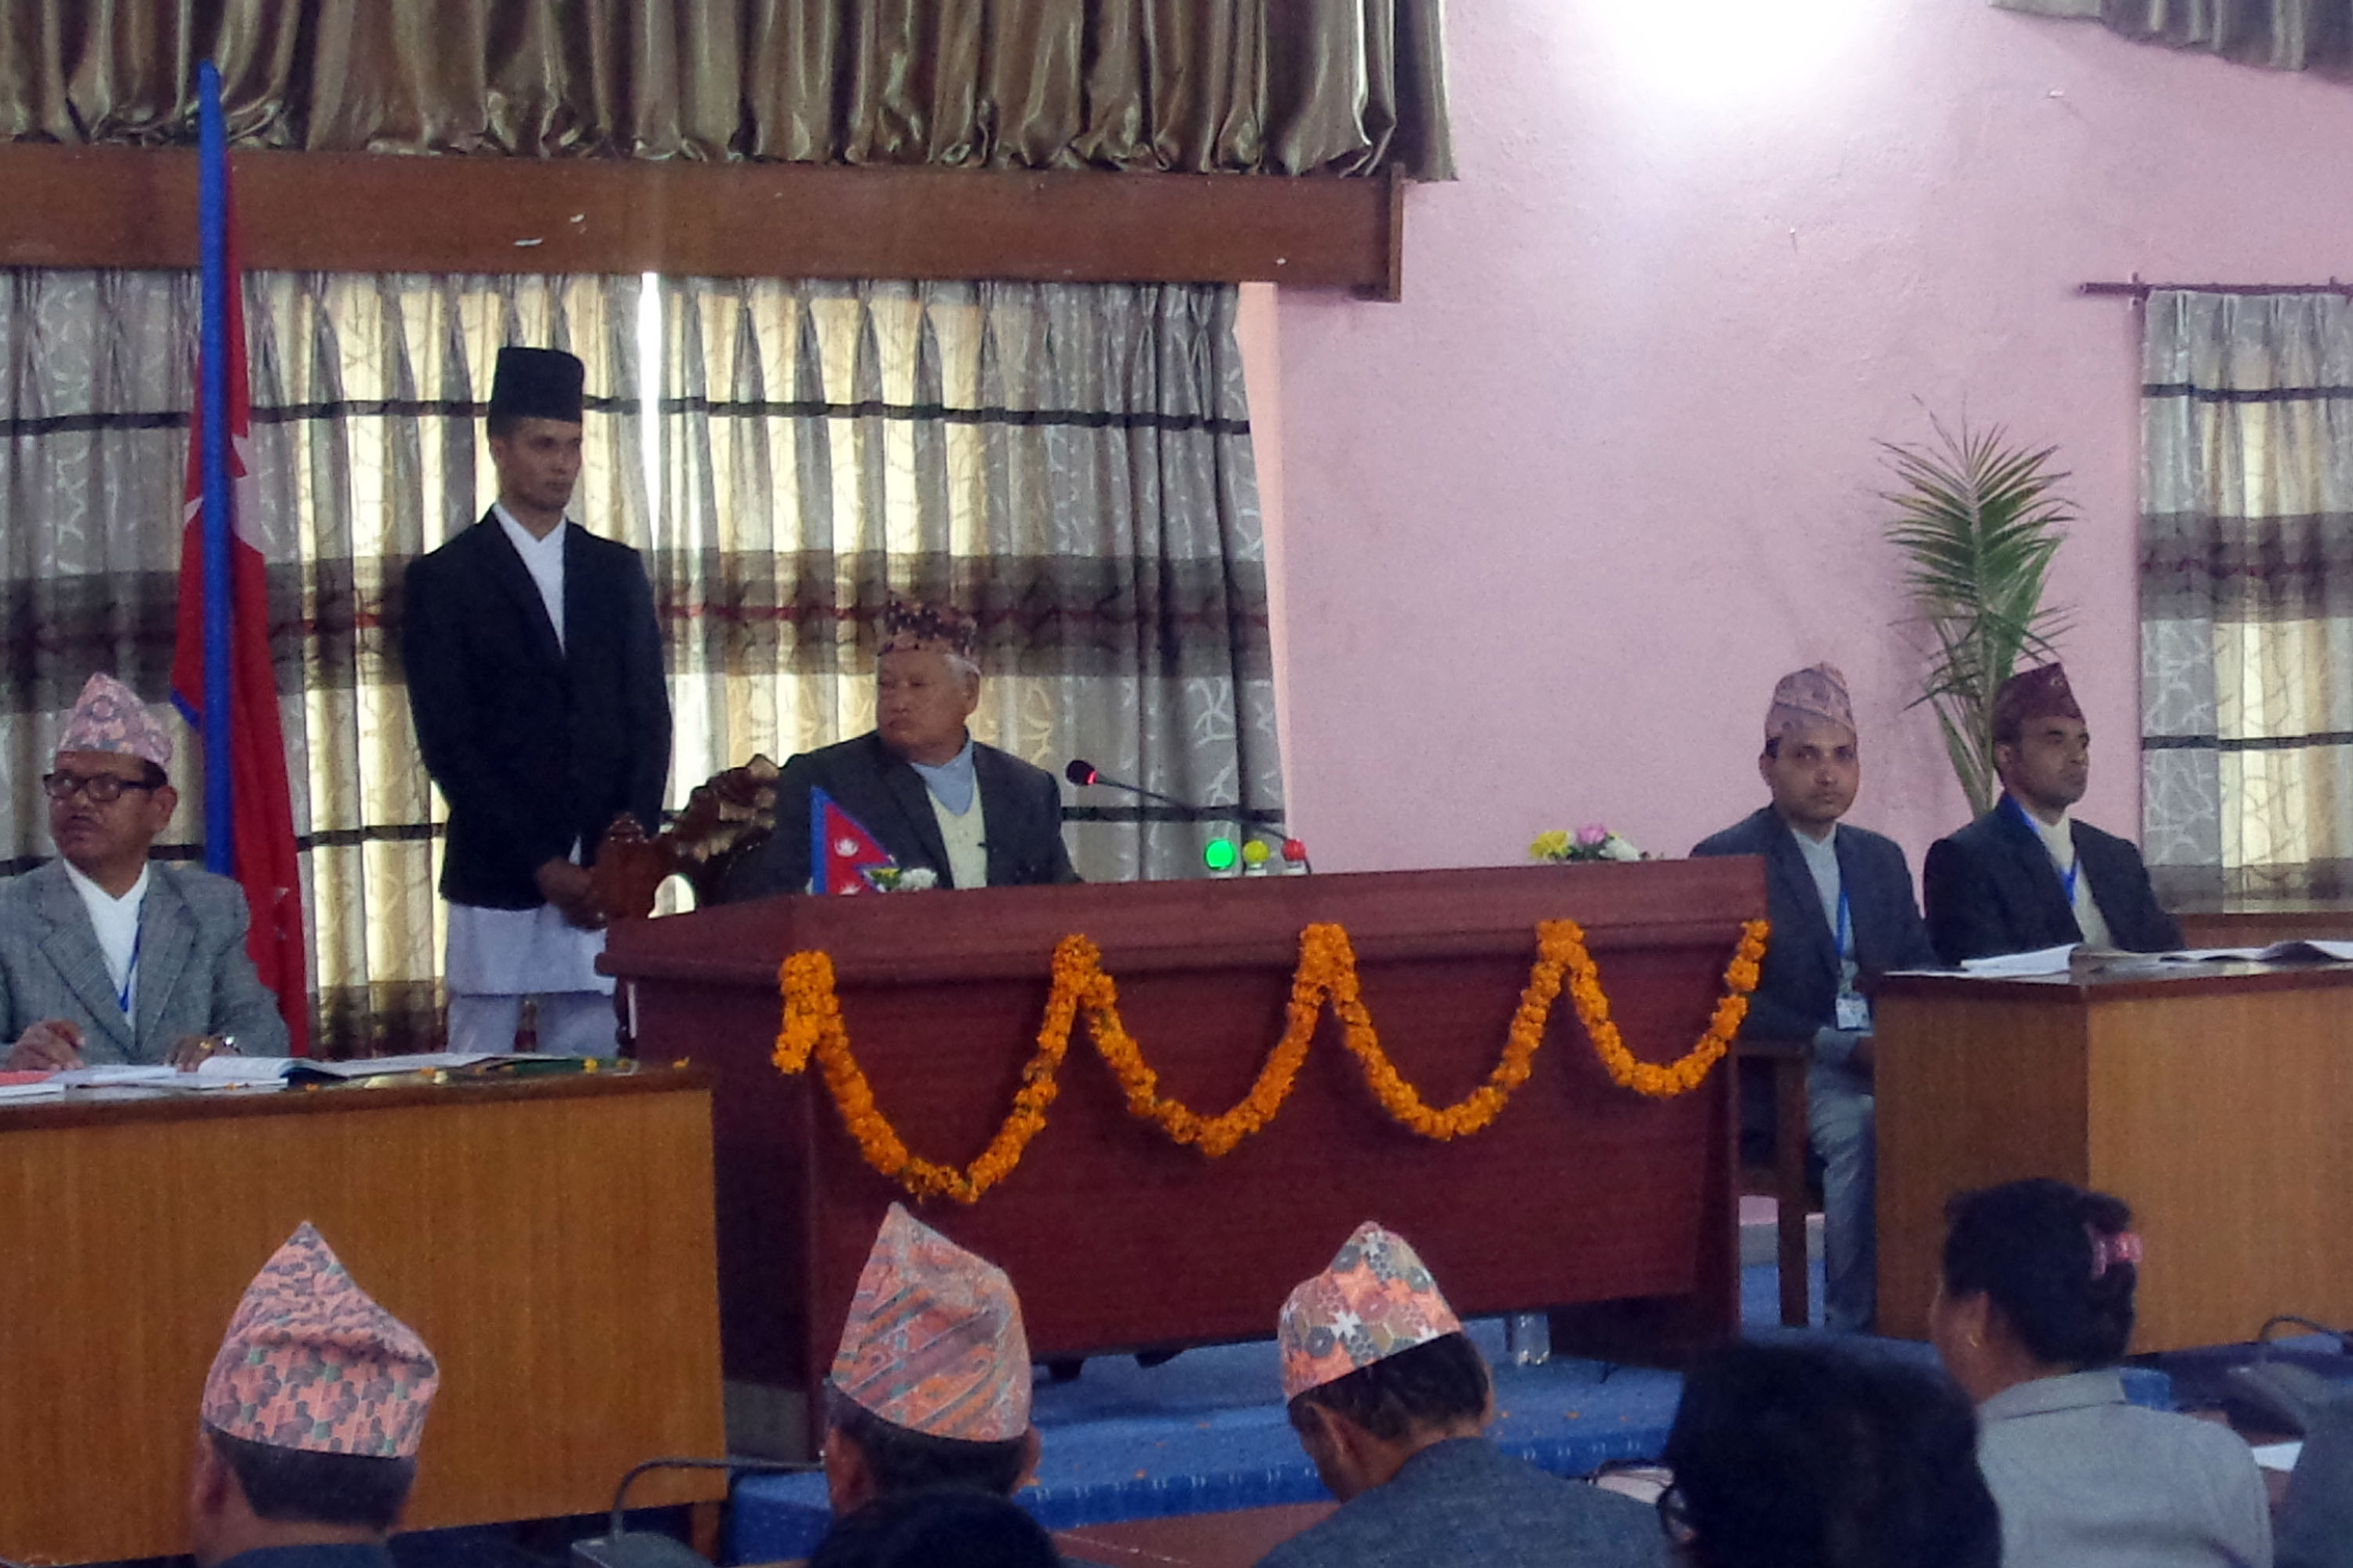 The inaugural meeting of Province 4 Provincial Assembly being held at Pokhara on February 5, 2018. Photo: RSS